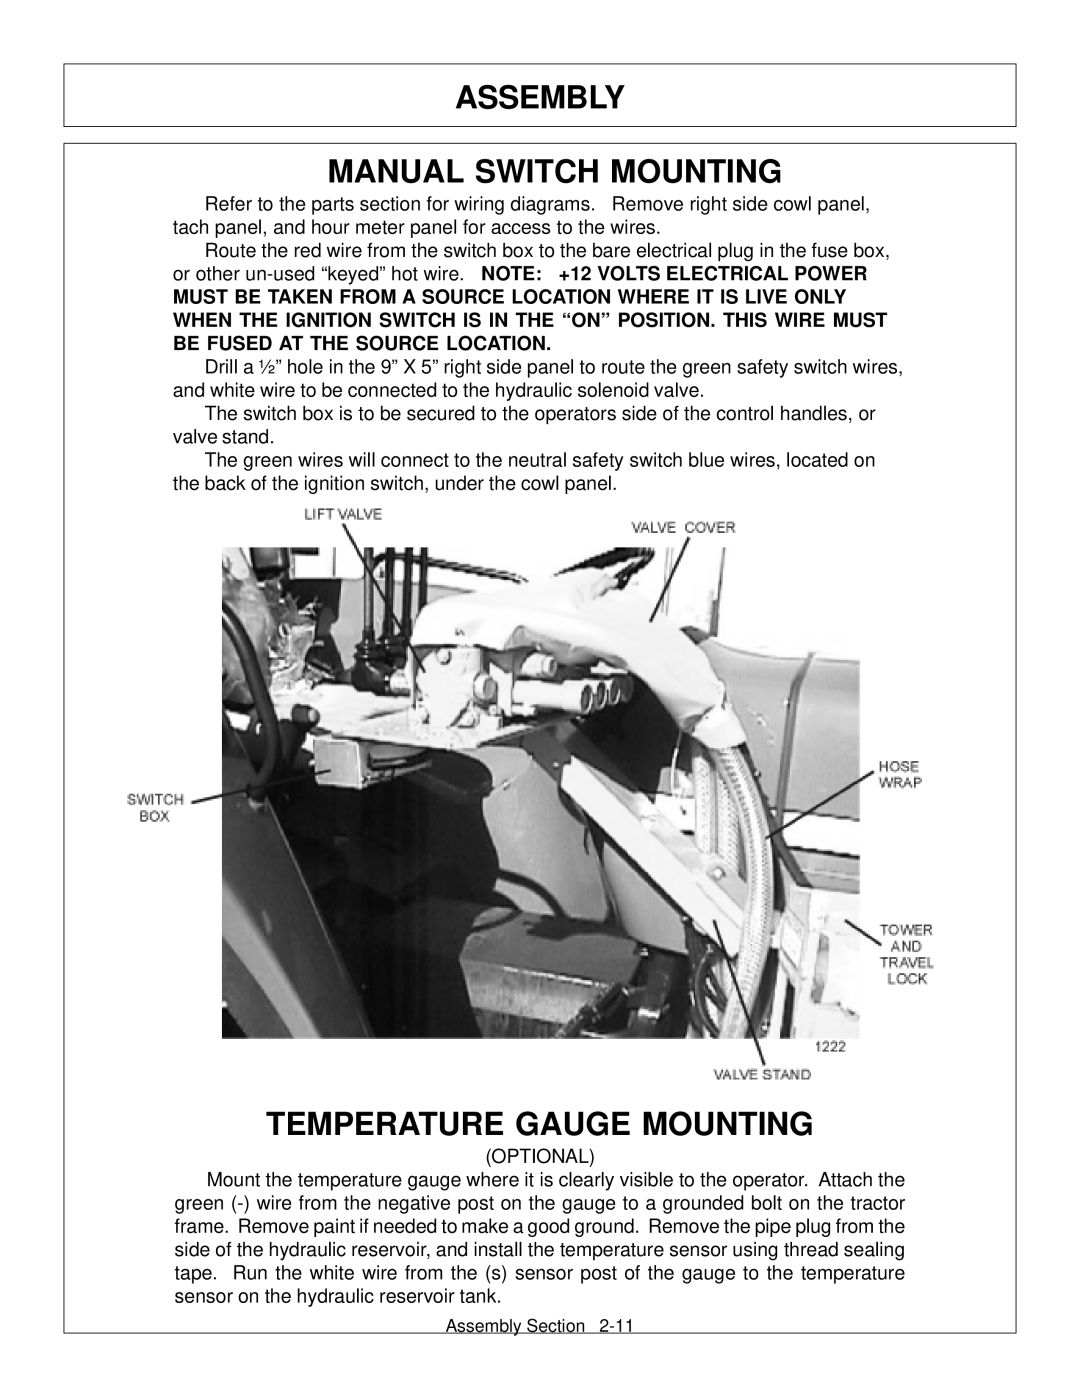 Tiger Products Co., Ltd JD 72-7520 manual Assembly Manual Switch Mounting, Temperature Gauge Mounting 